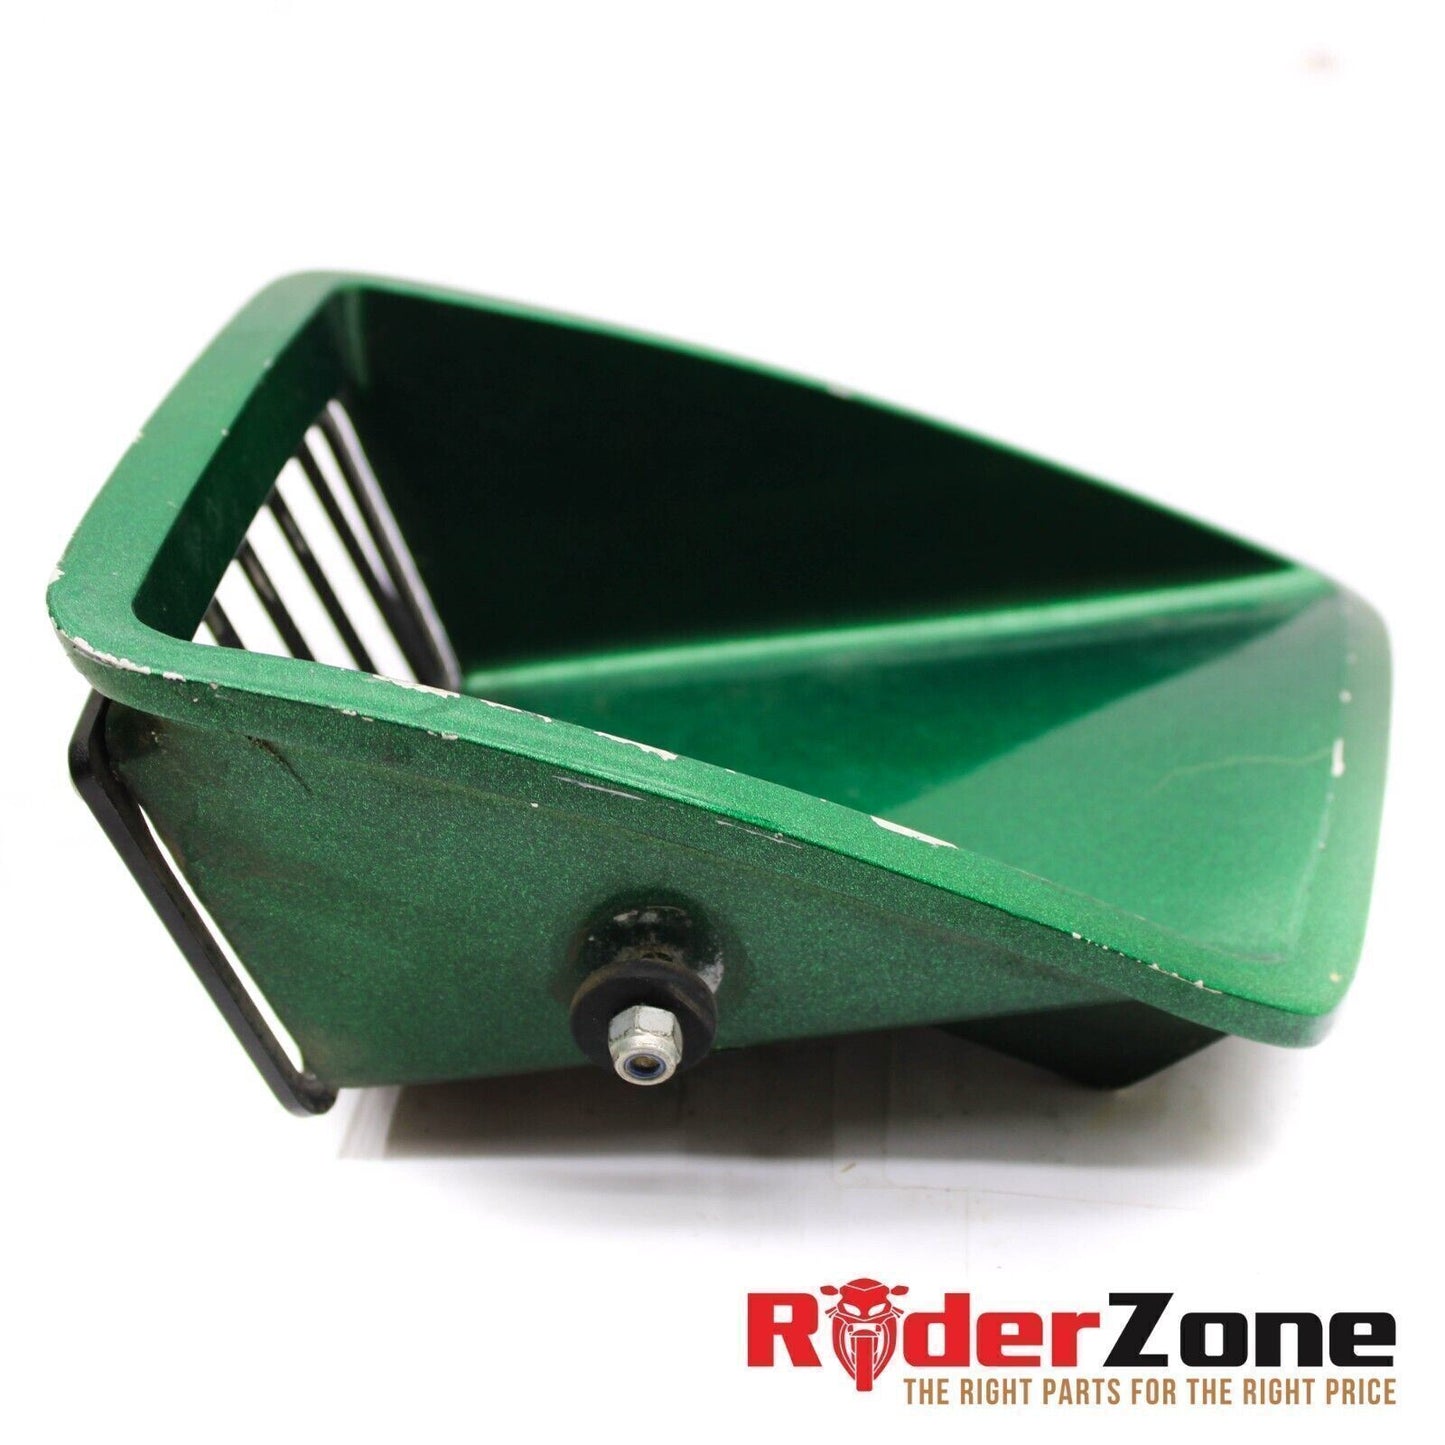 BMW R100RT LEFT FAIRING VENT COWLING GREEN FRONT AIR DUCT R100 RT GREEN